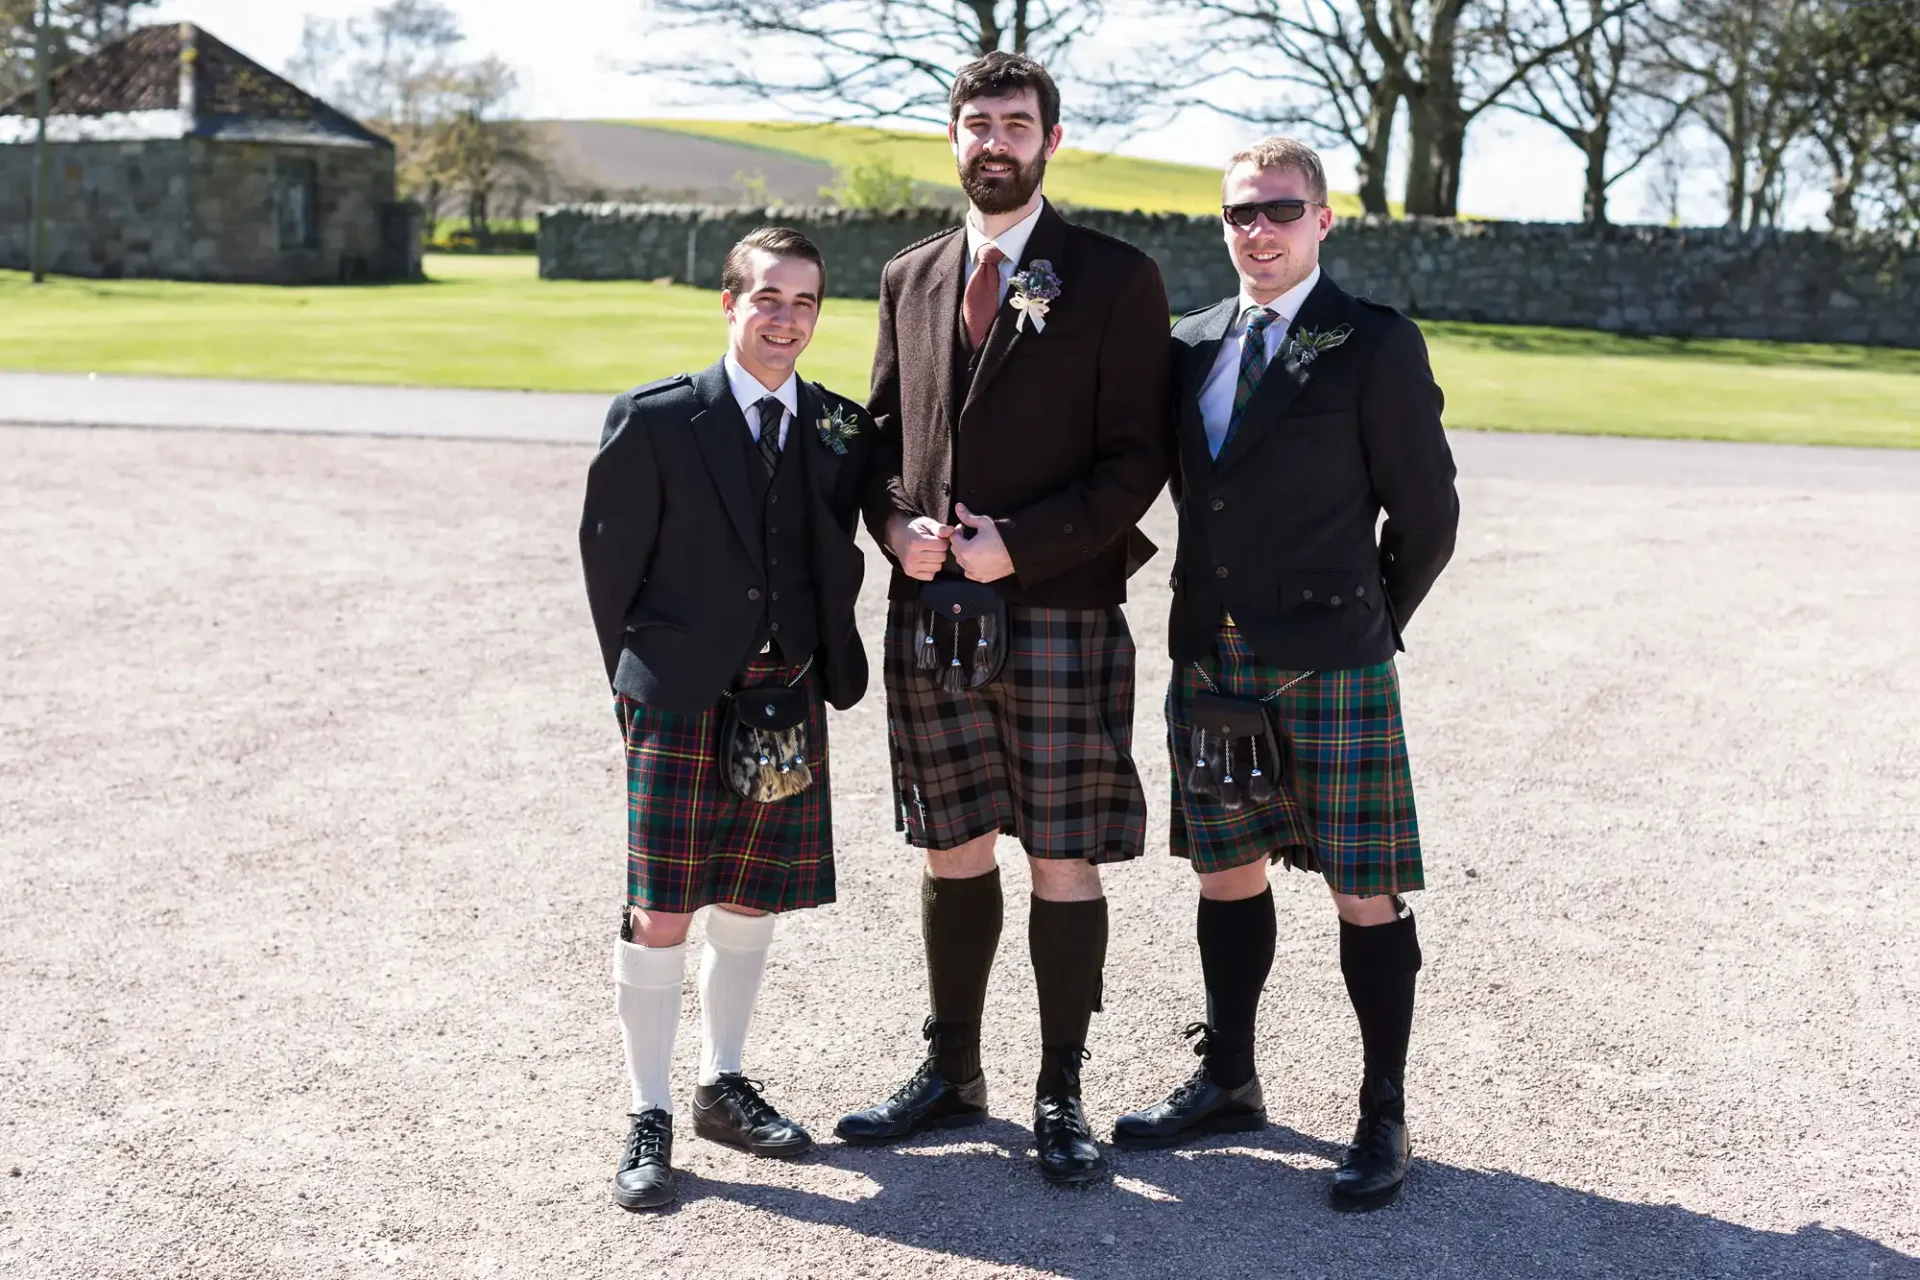 Three men in traditional scottish kilts and jackets posing together outdoors on a sunny day, with a stone wall and trees in the background.